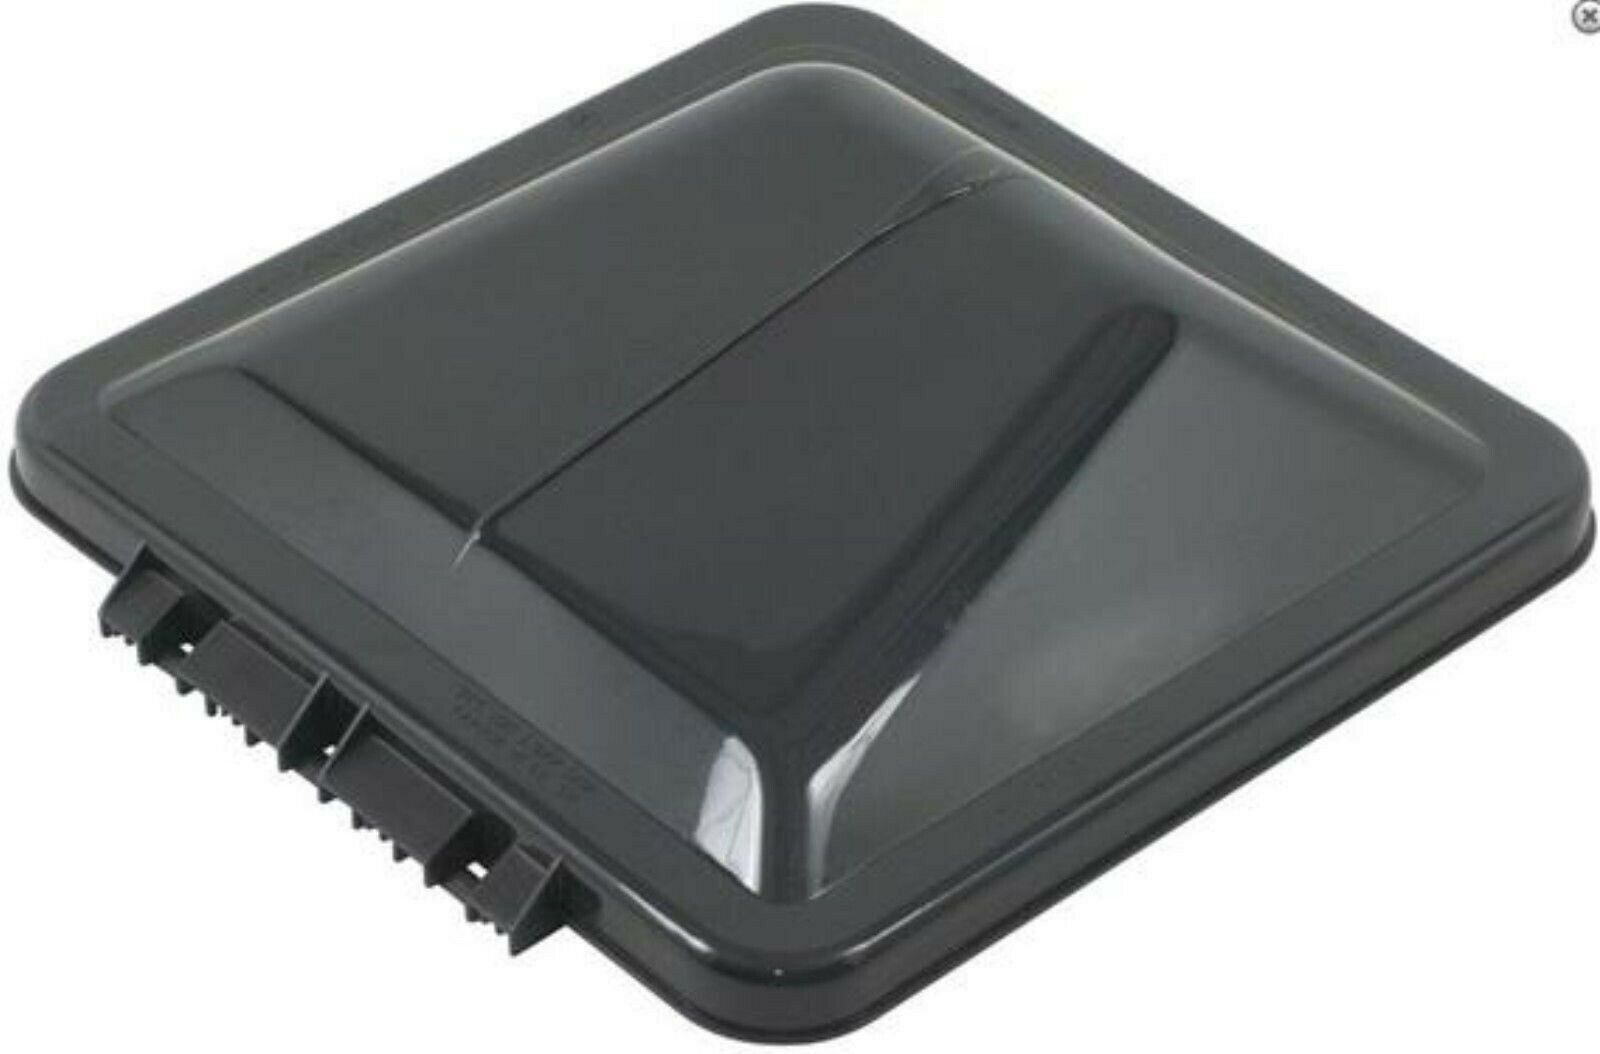 Ventline By Dexter BVD0449-A03 Smoke Wedge Shaped RV Roof Vent Cover For Standard Ventadomes